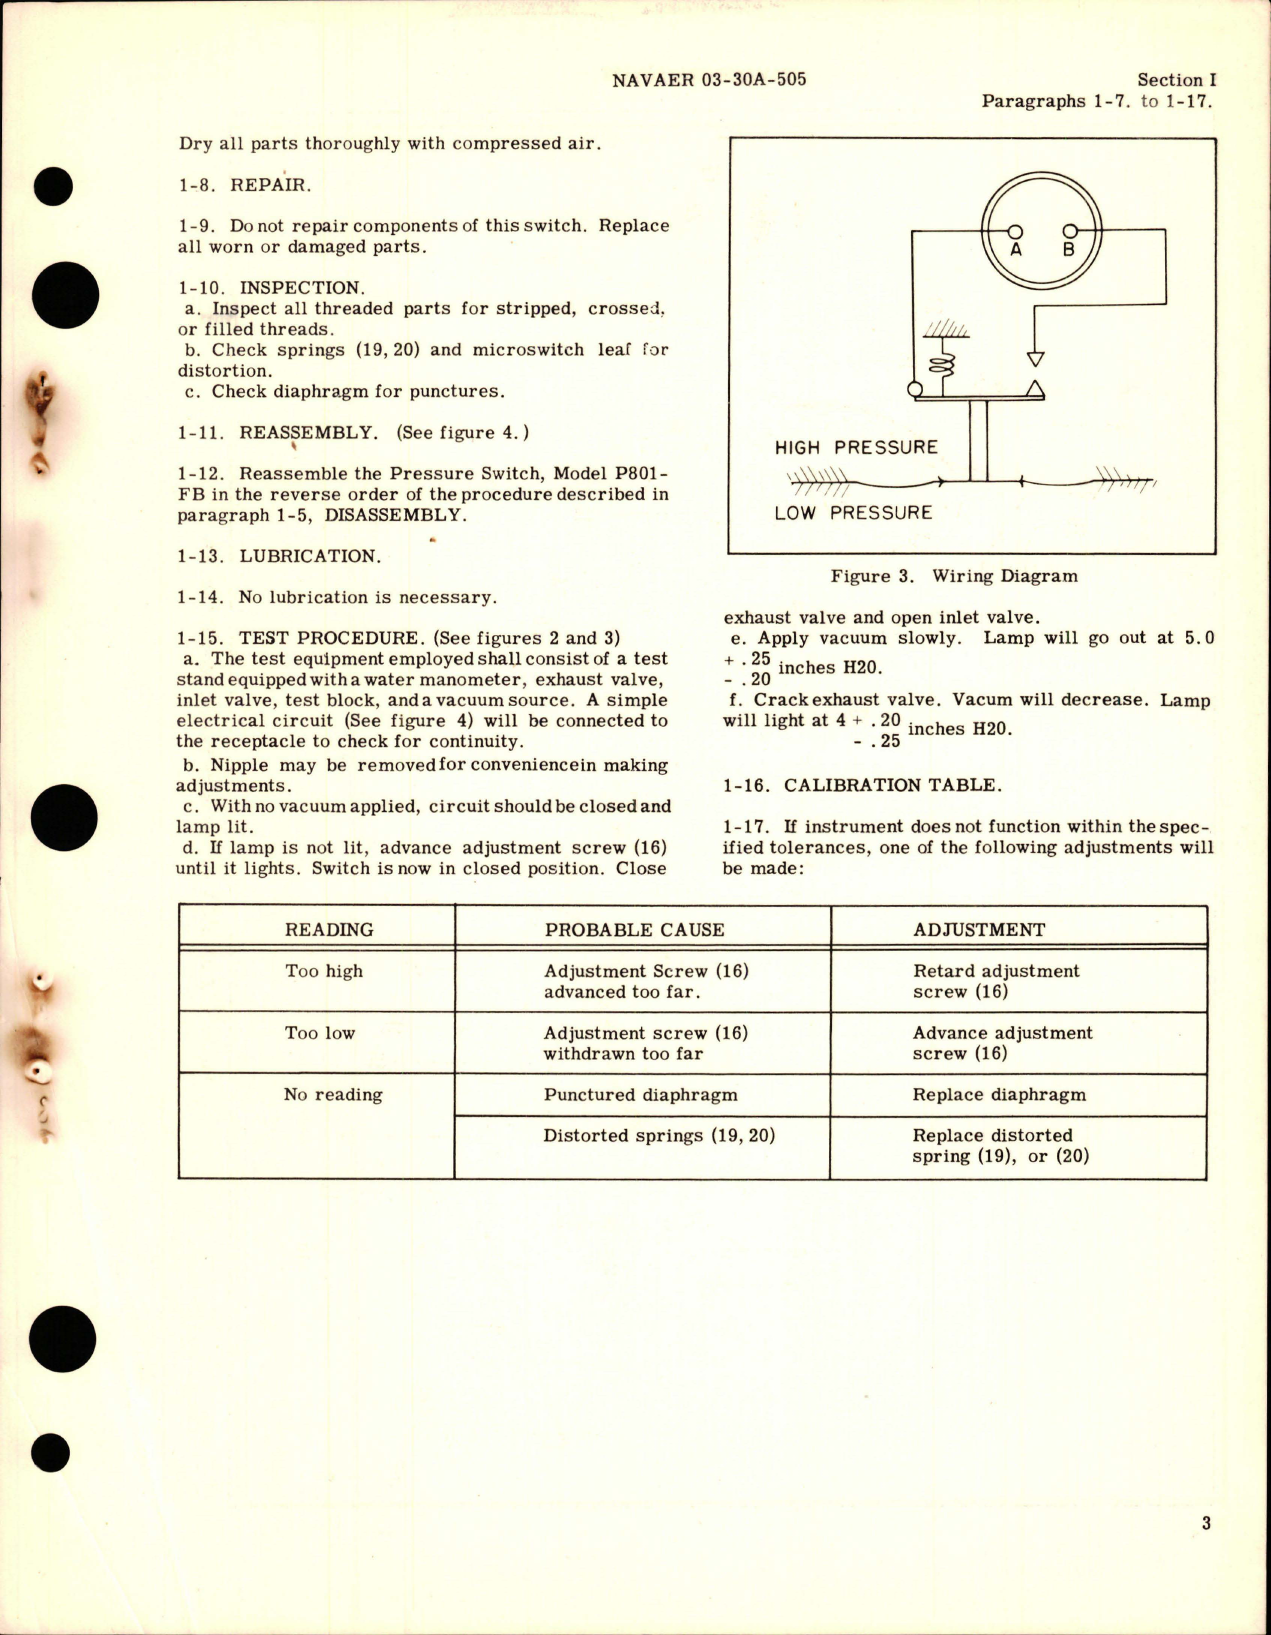 Sample page 5 from AirCorps Library document: Overhaul Instructions with Parts Catalog for Pressure Switch - Part P801-FB